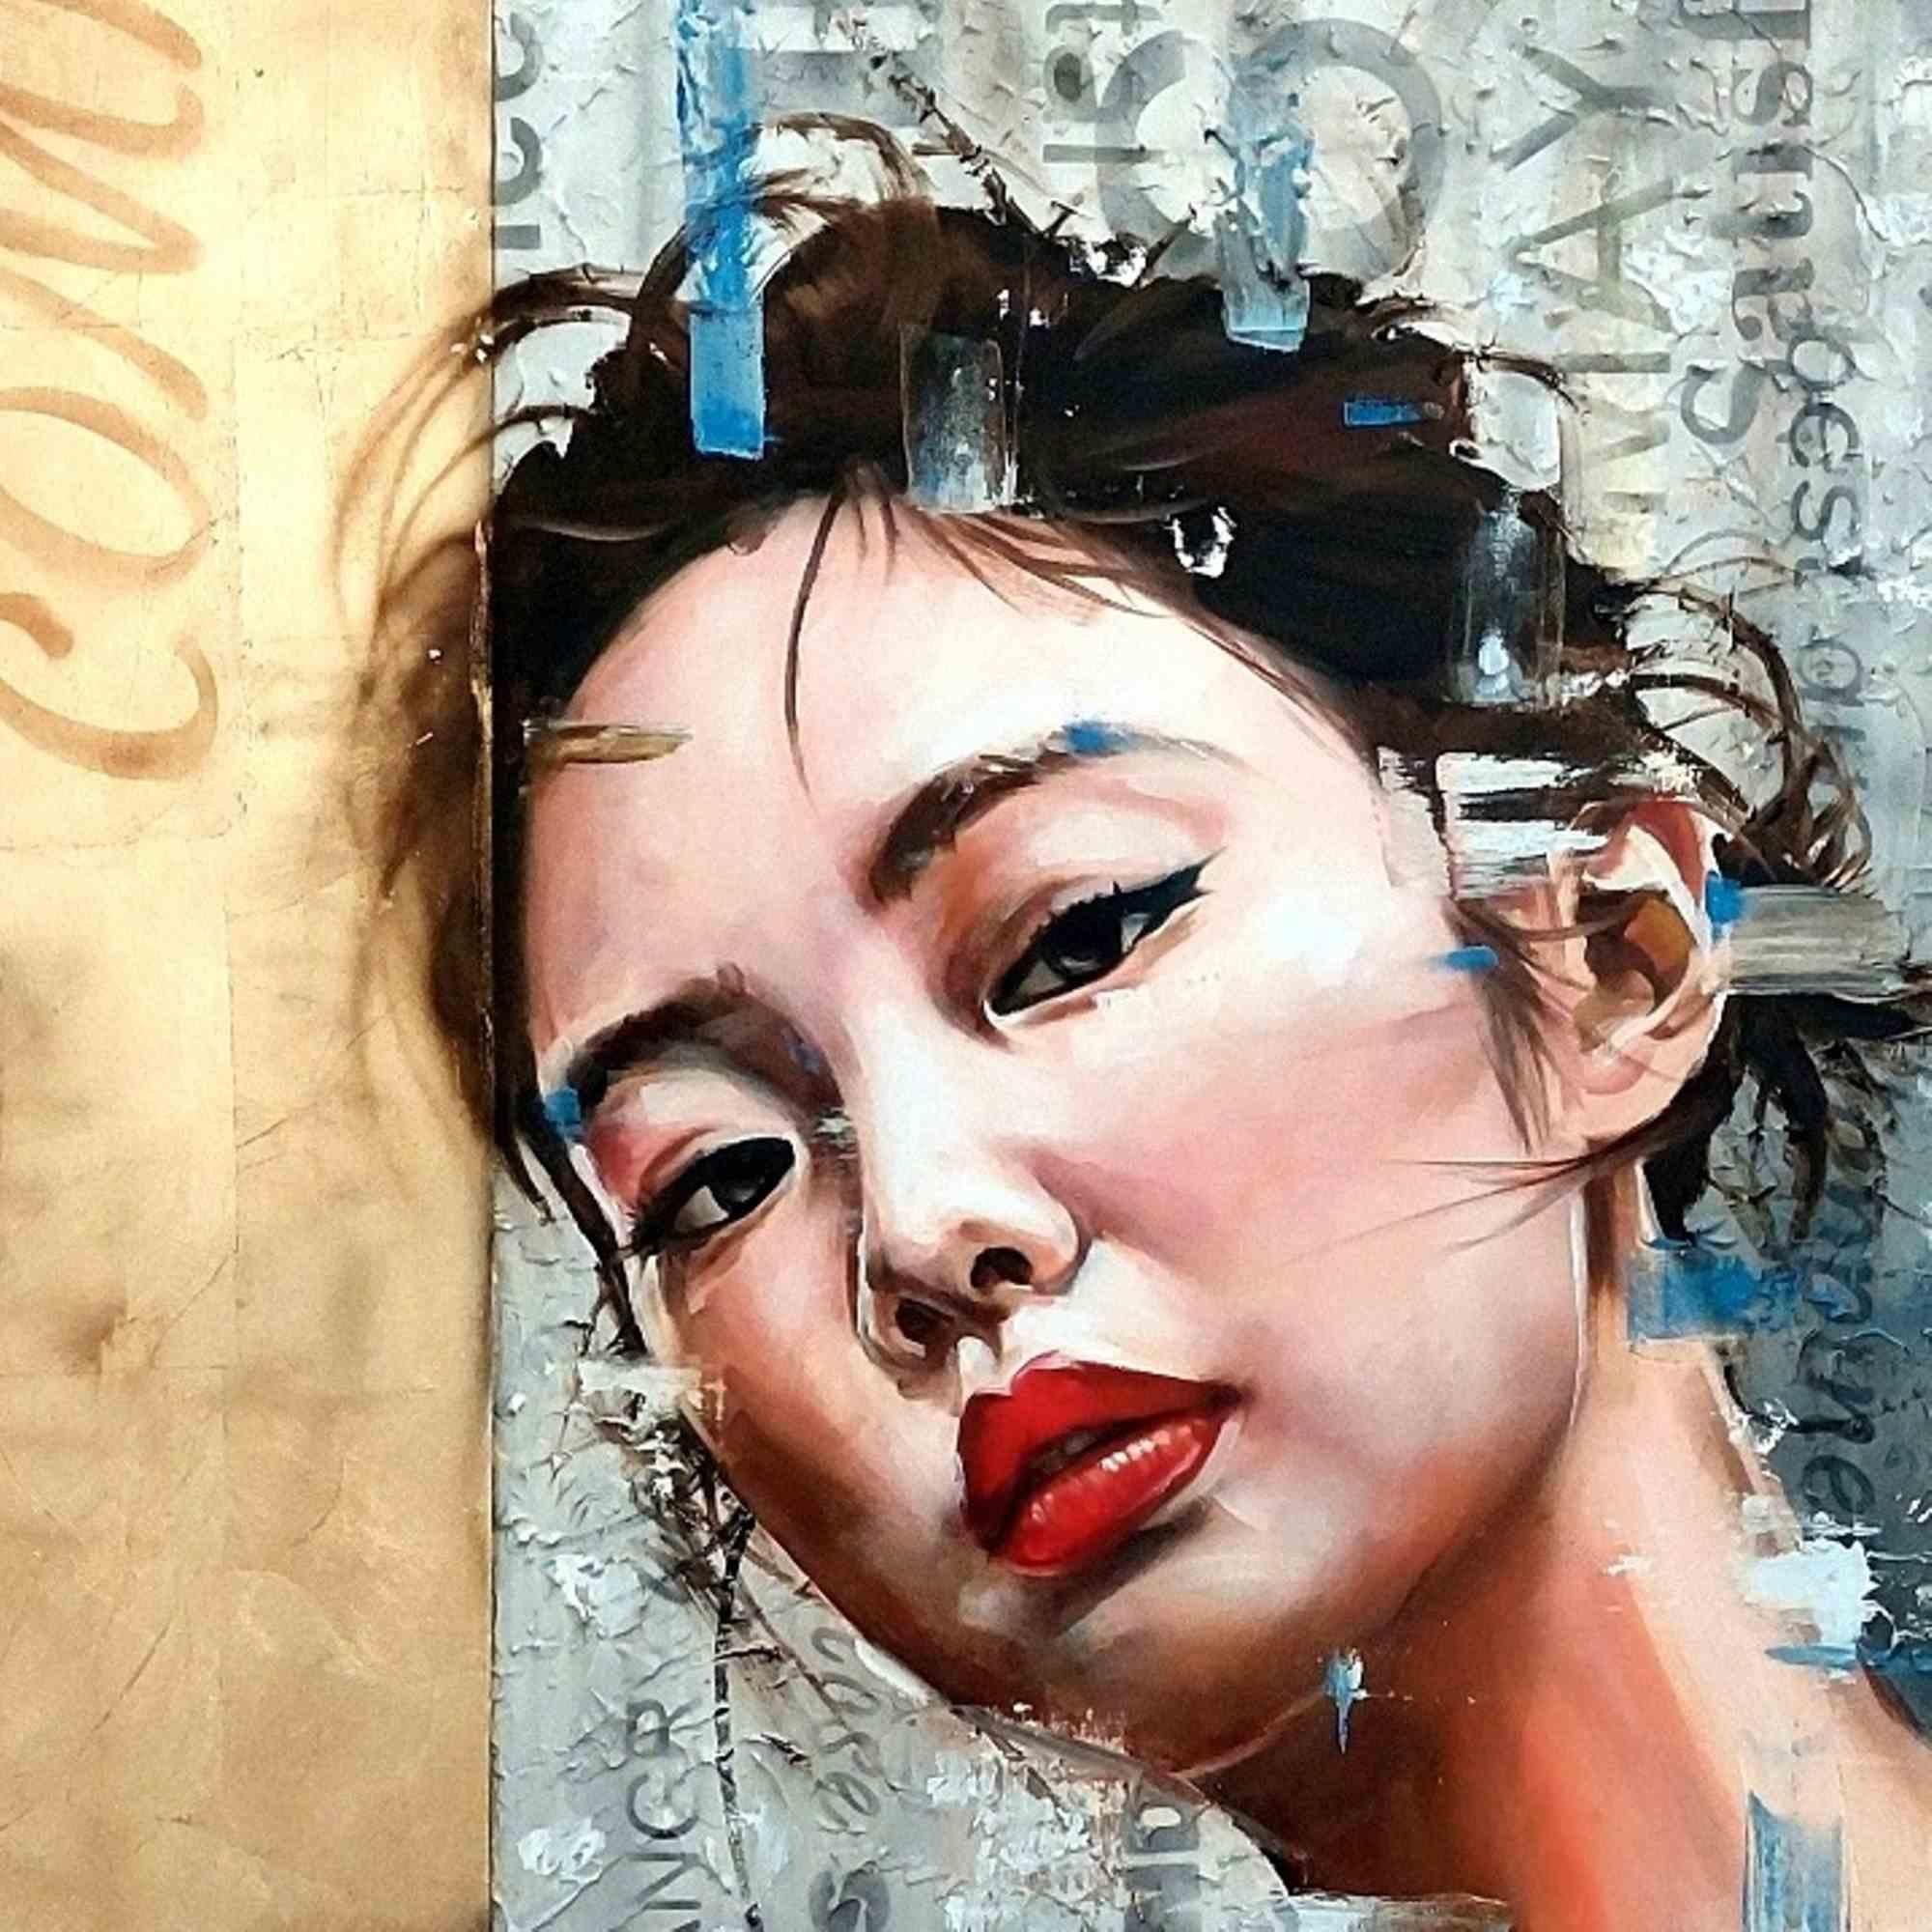 Okurimono means gift in Japanese. It is the portrait of a young girl who, behind a golden glass, is waiting for someone to whom she will give roses. The wall in the background is decorated with graffiti and made with modelable acrylic paste and,